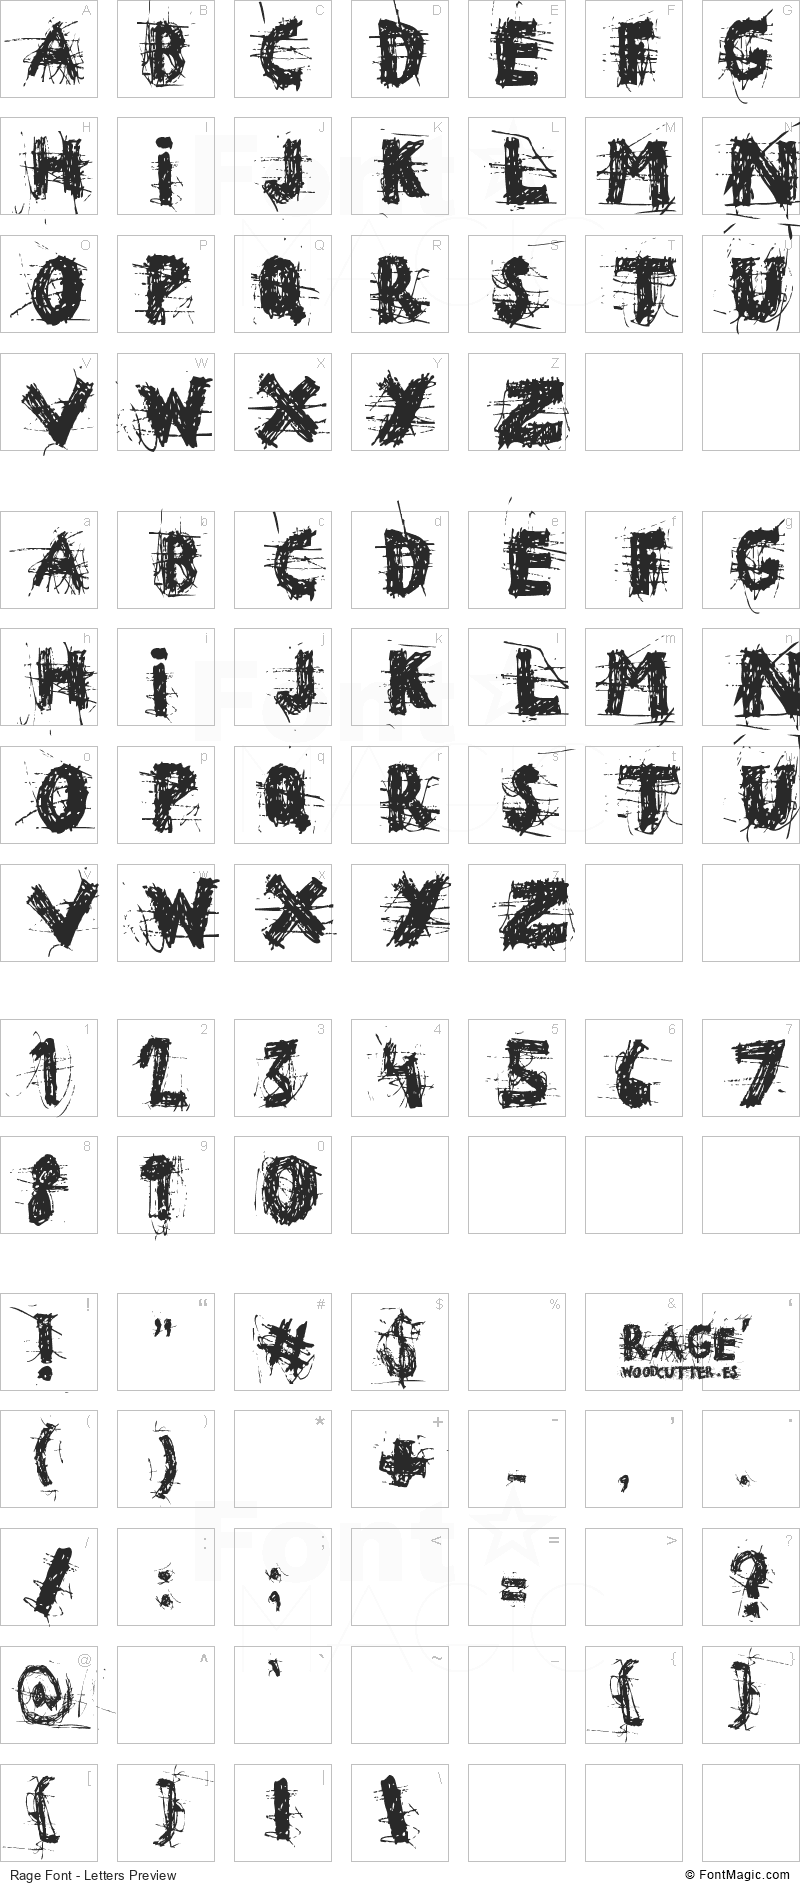 Rage Font - All Latters Preview Chart